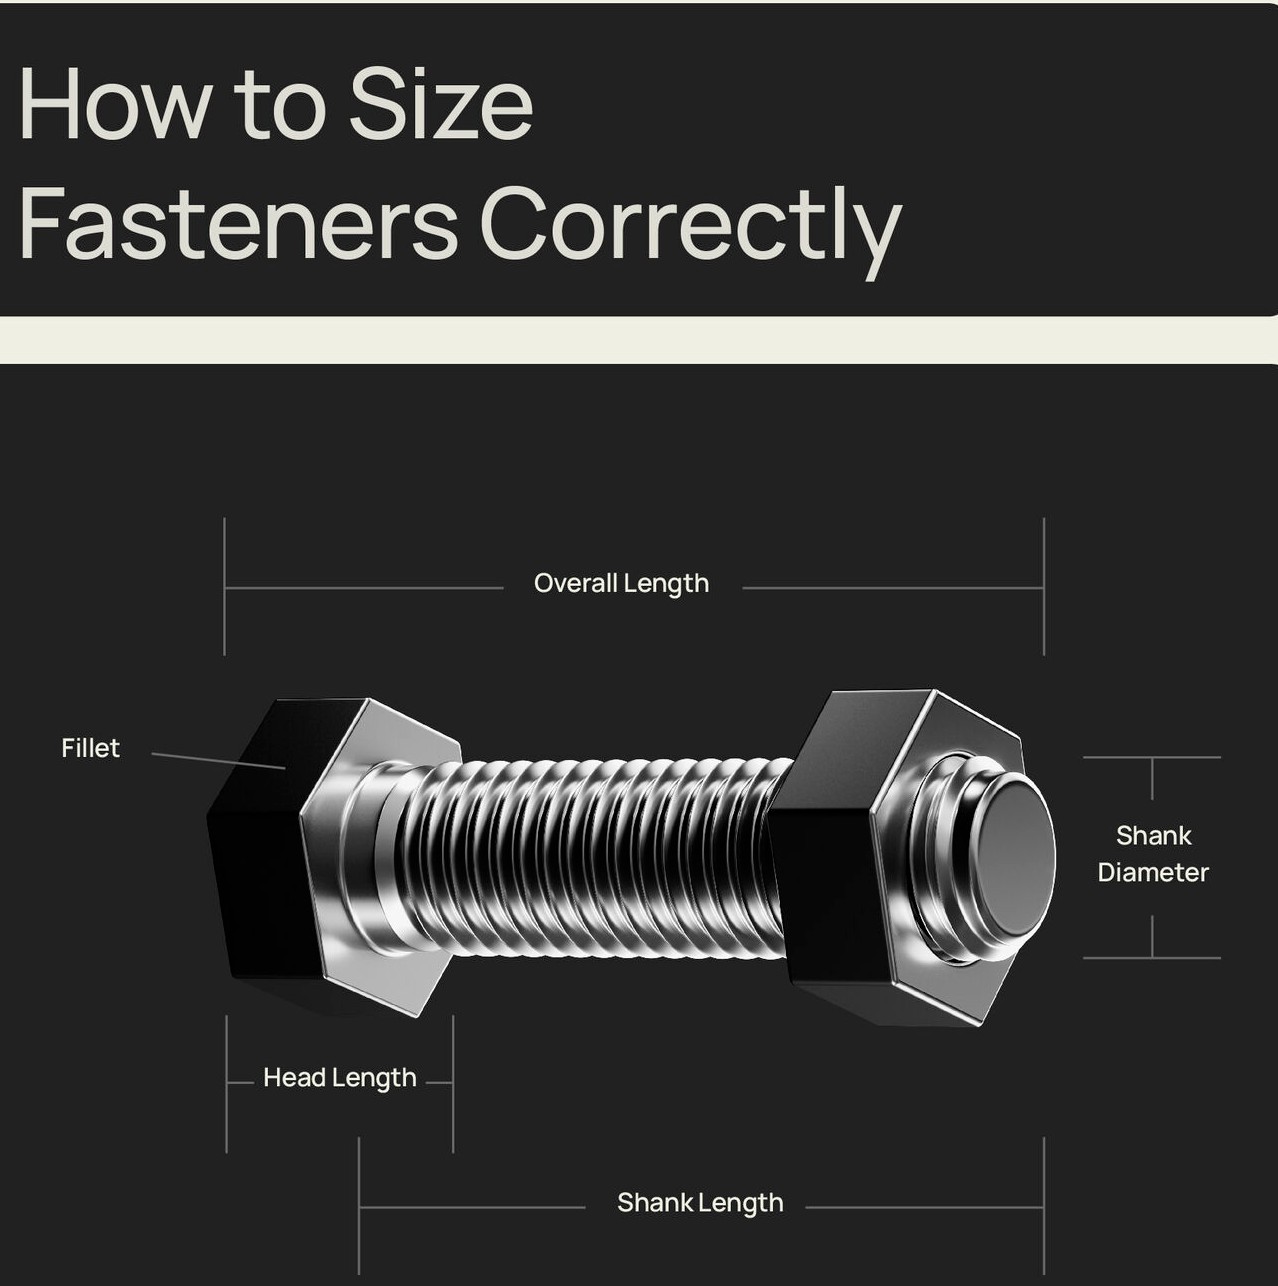 How To Size Fasteners Correctly